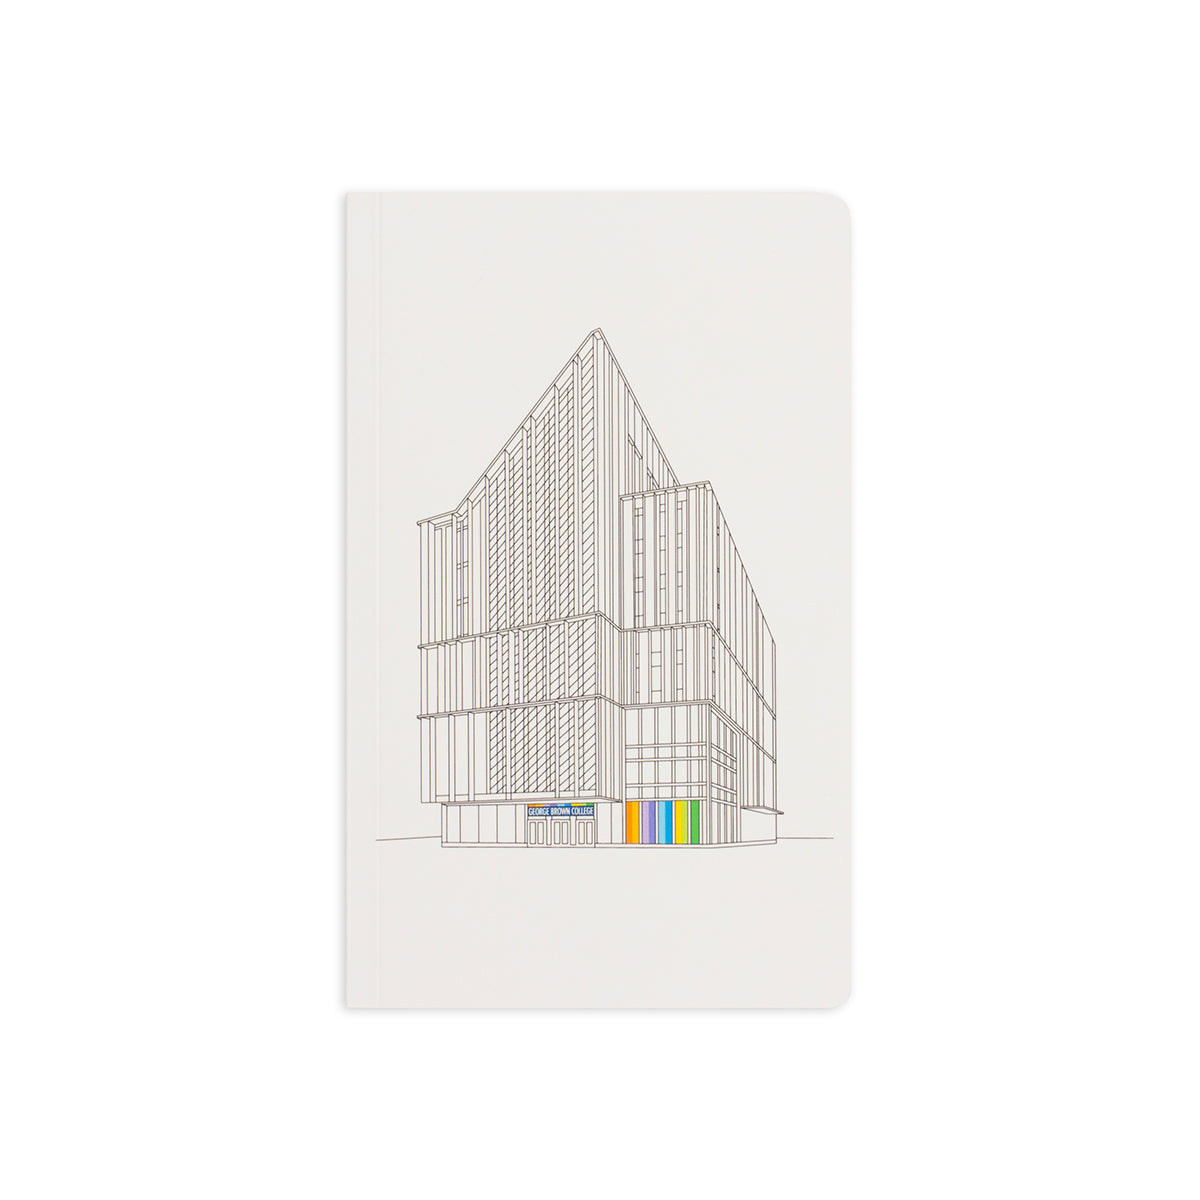 5" x 8.25" soft cover white notebook featuring George Brown College's Arbour Building in line art style